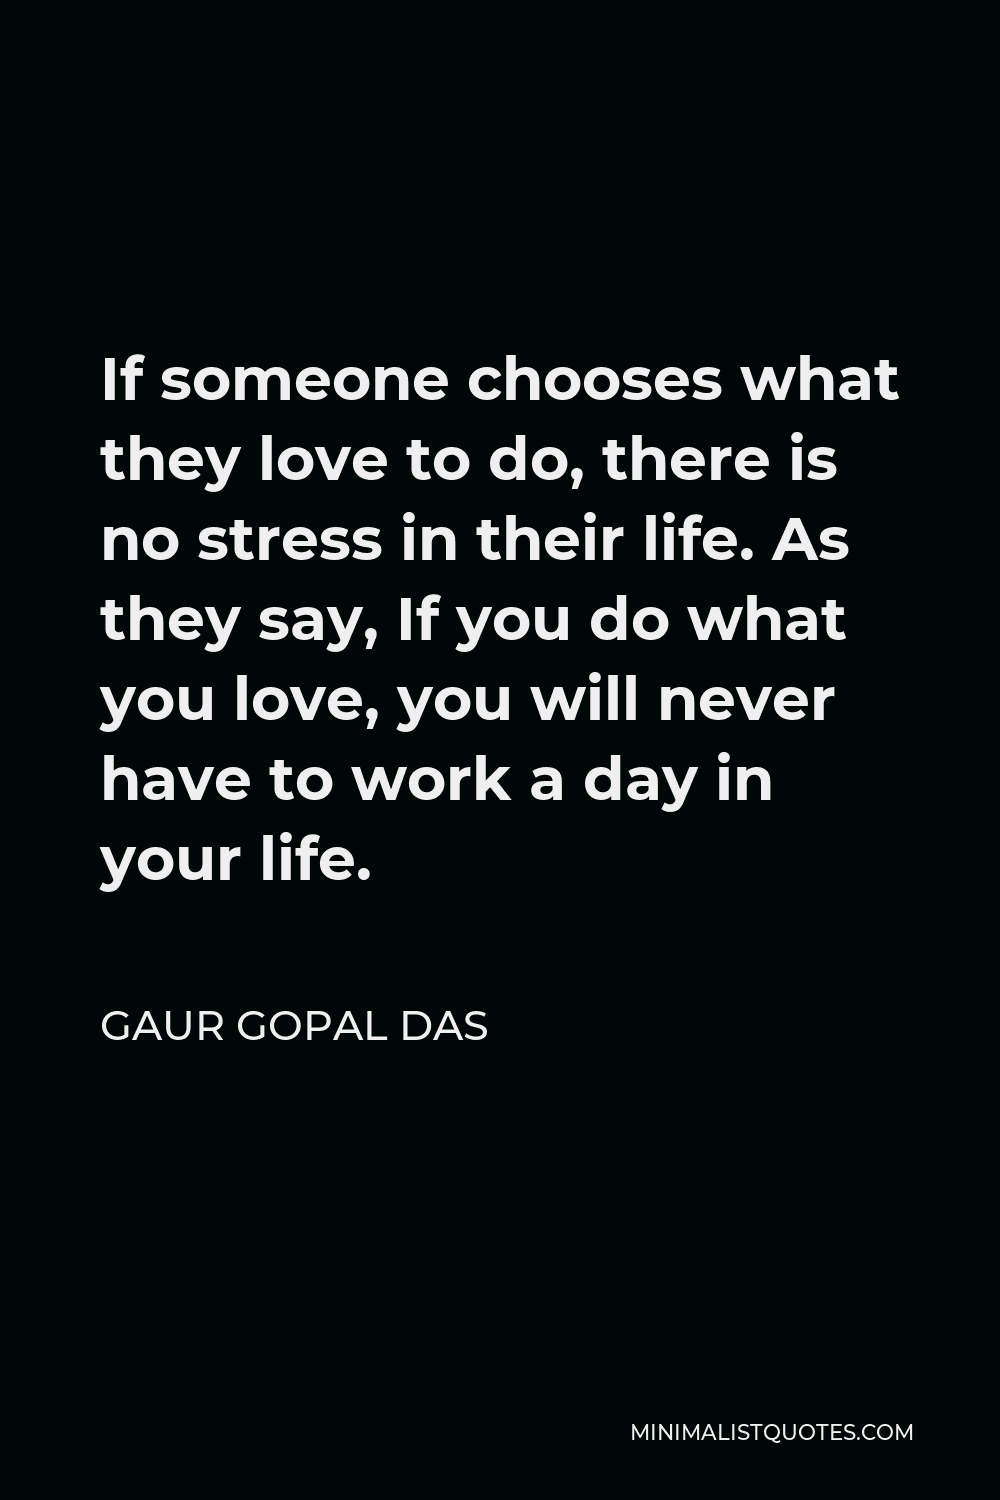 Gaur Gopal Das Quote - If someone chooses what they love to do, there is no stress in their life. As they say, If you do what you love, you will never have to work a day in your life.